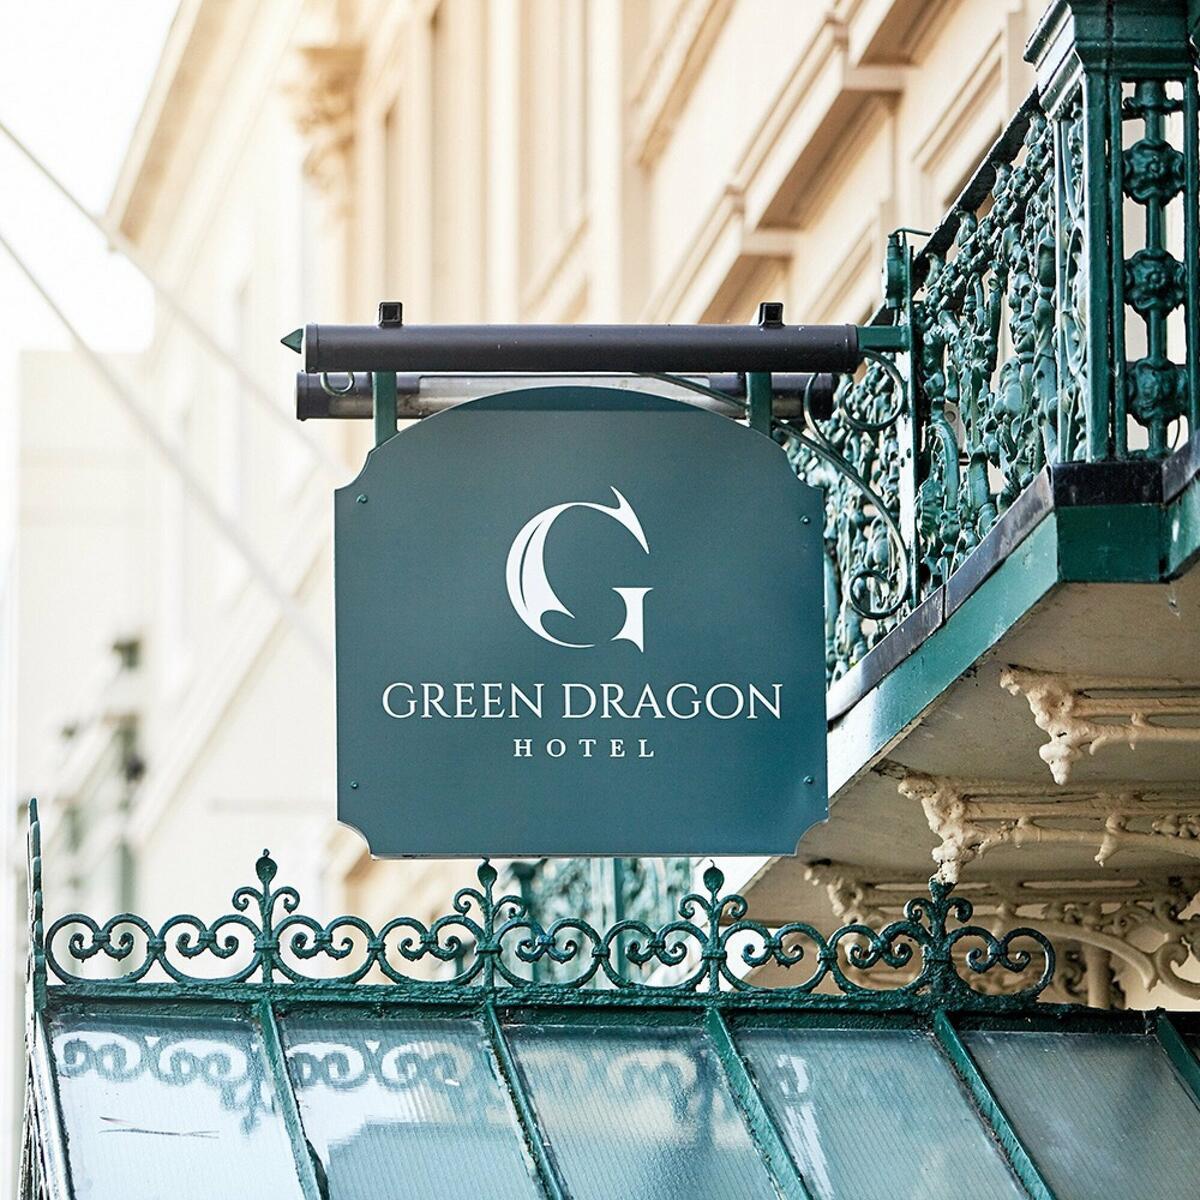 The Green Dragon is one of the oldest hotels in Britain